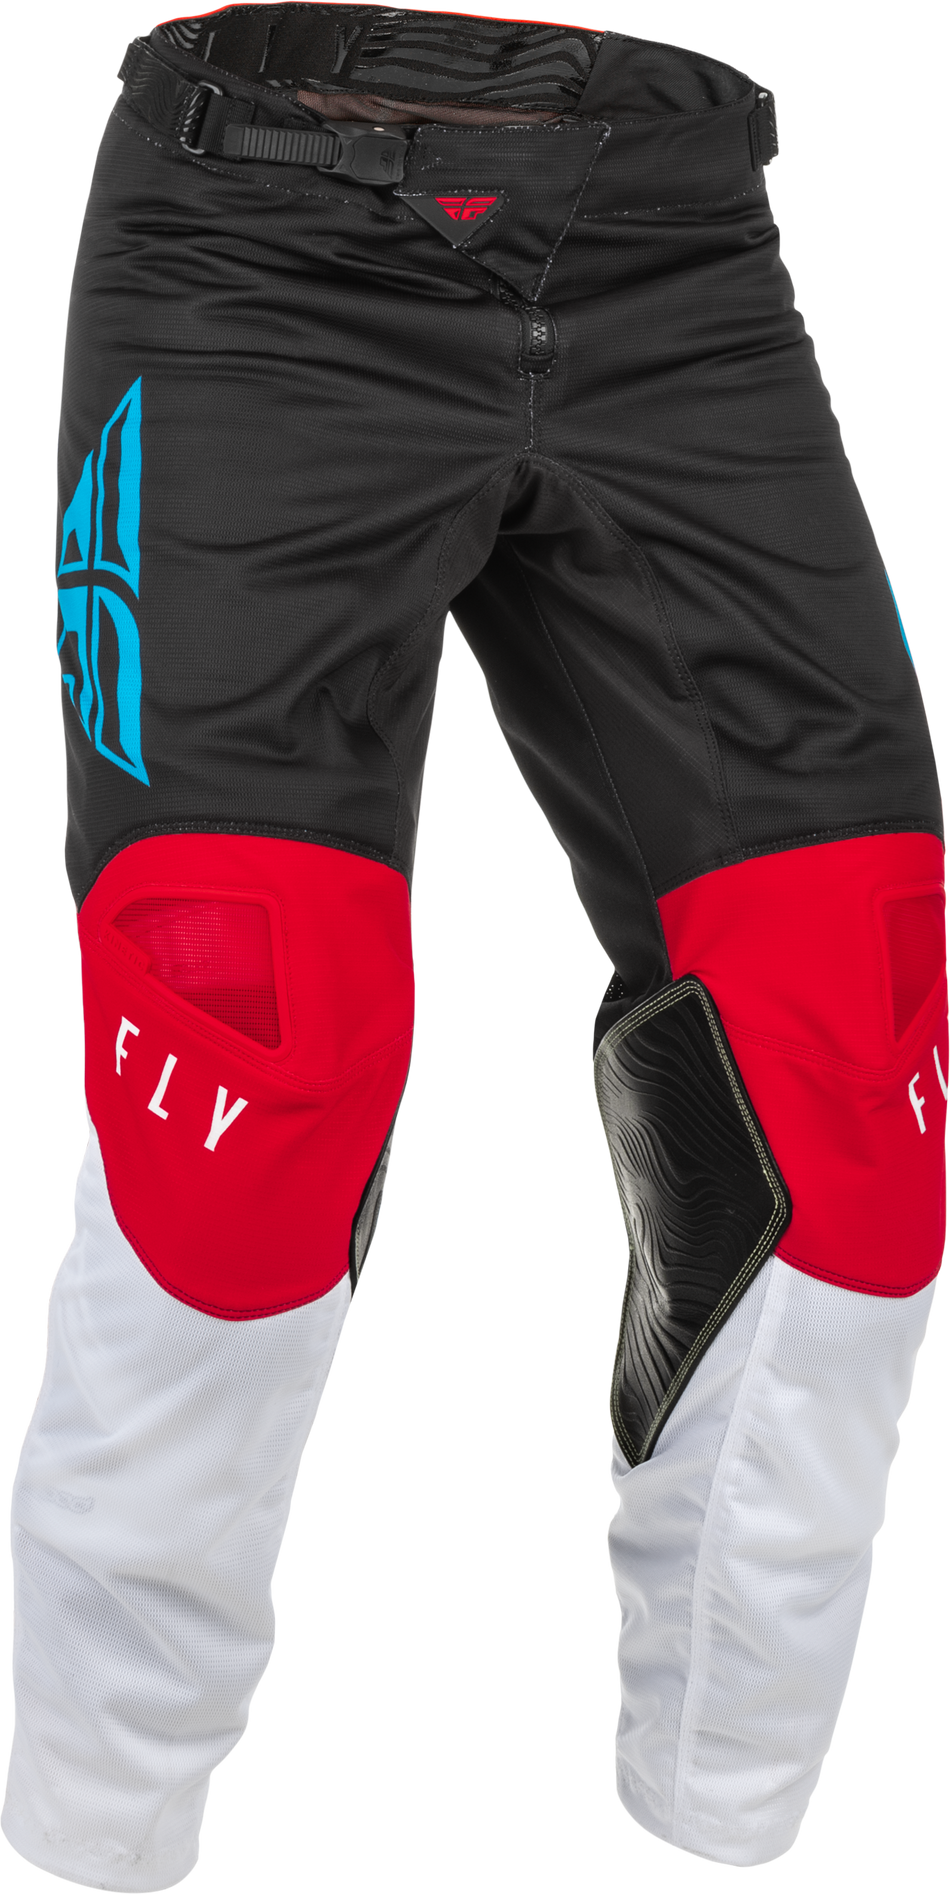 FLY RACING Kinetic Mesh Pants Red/White/Blue Sz 28 375-32428